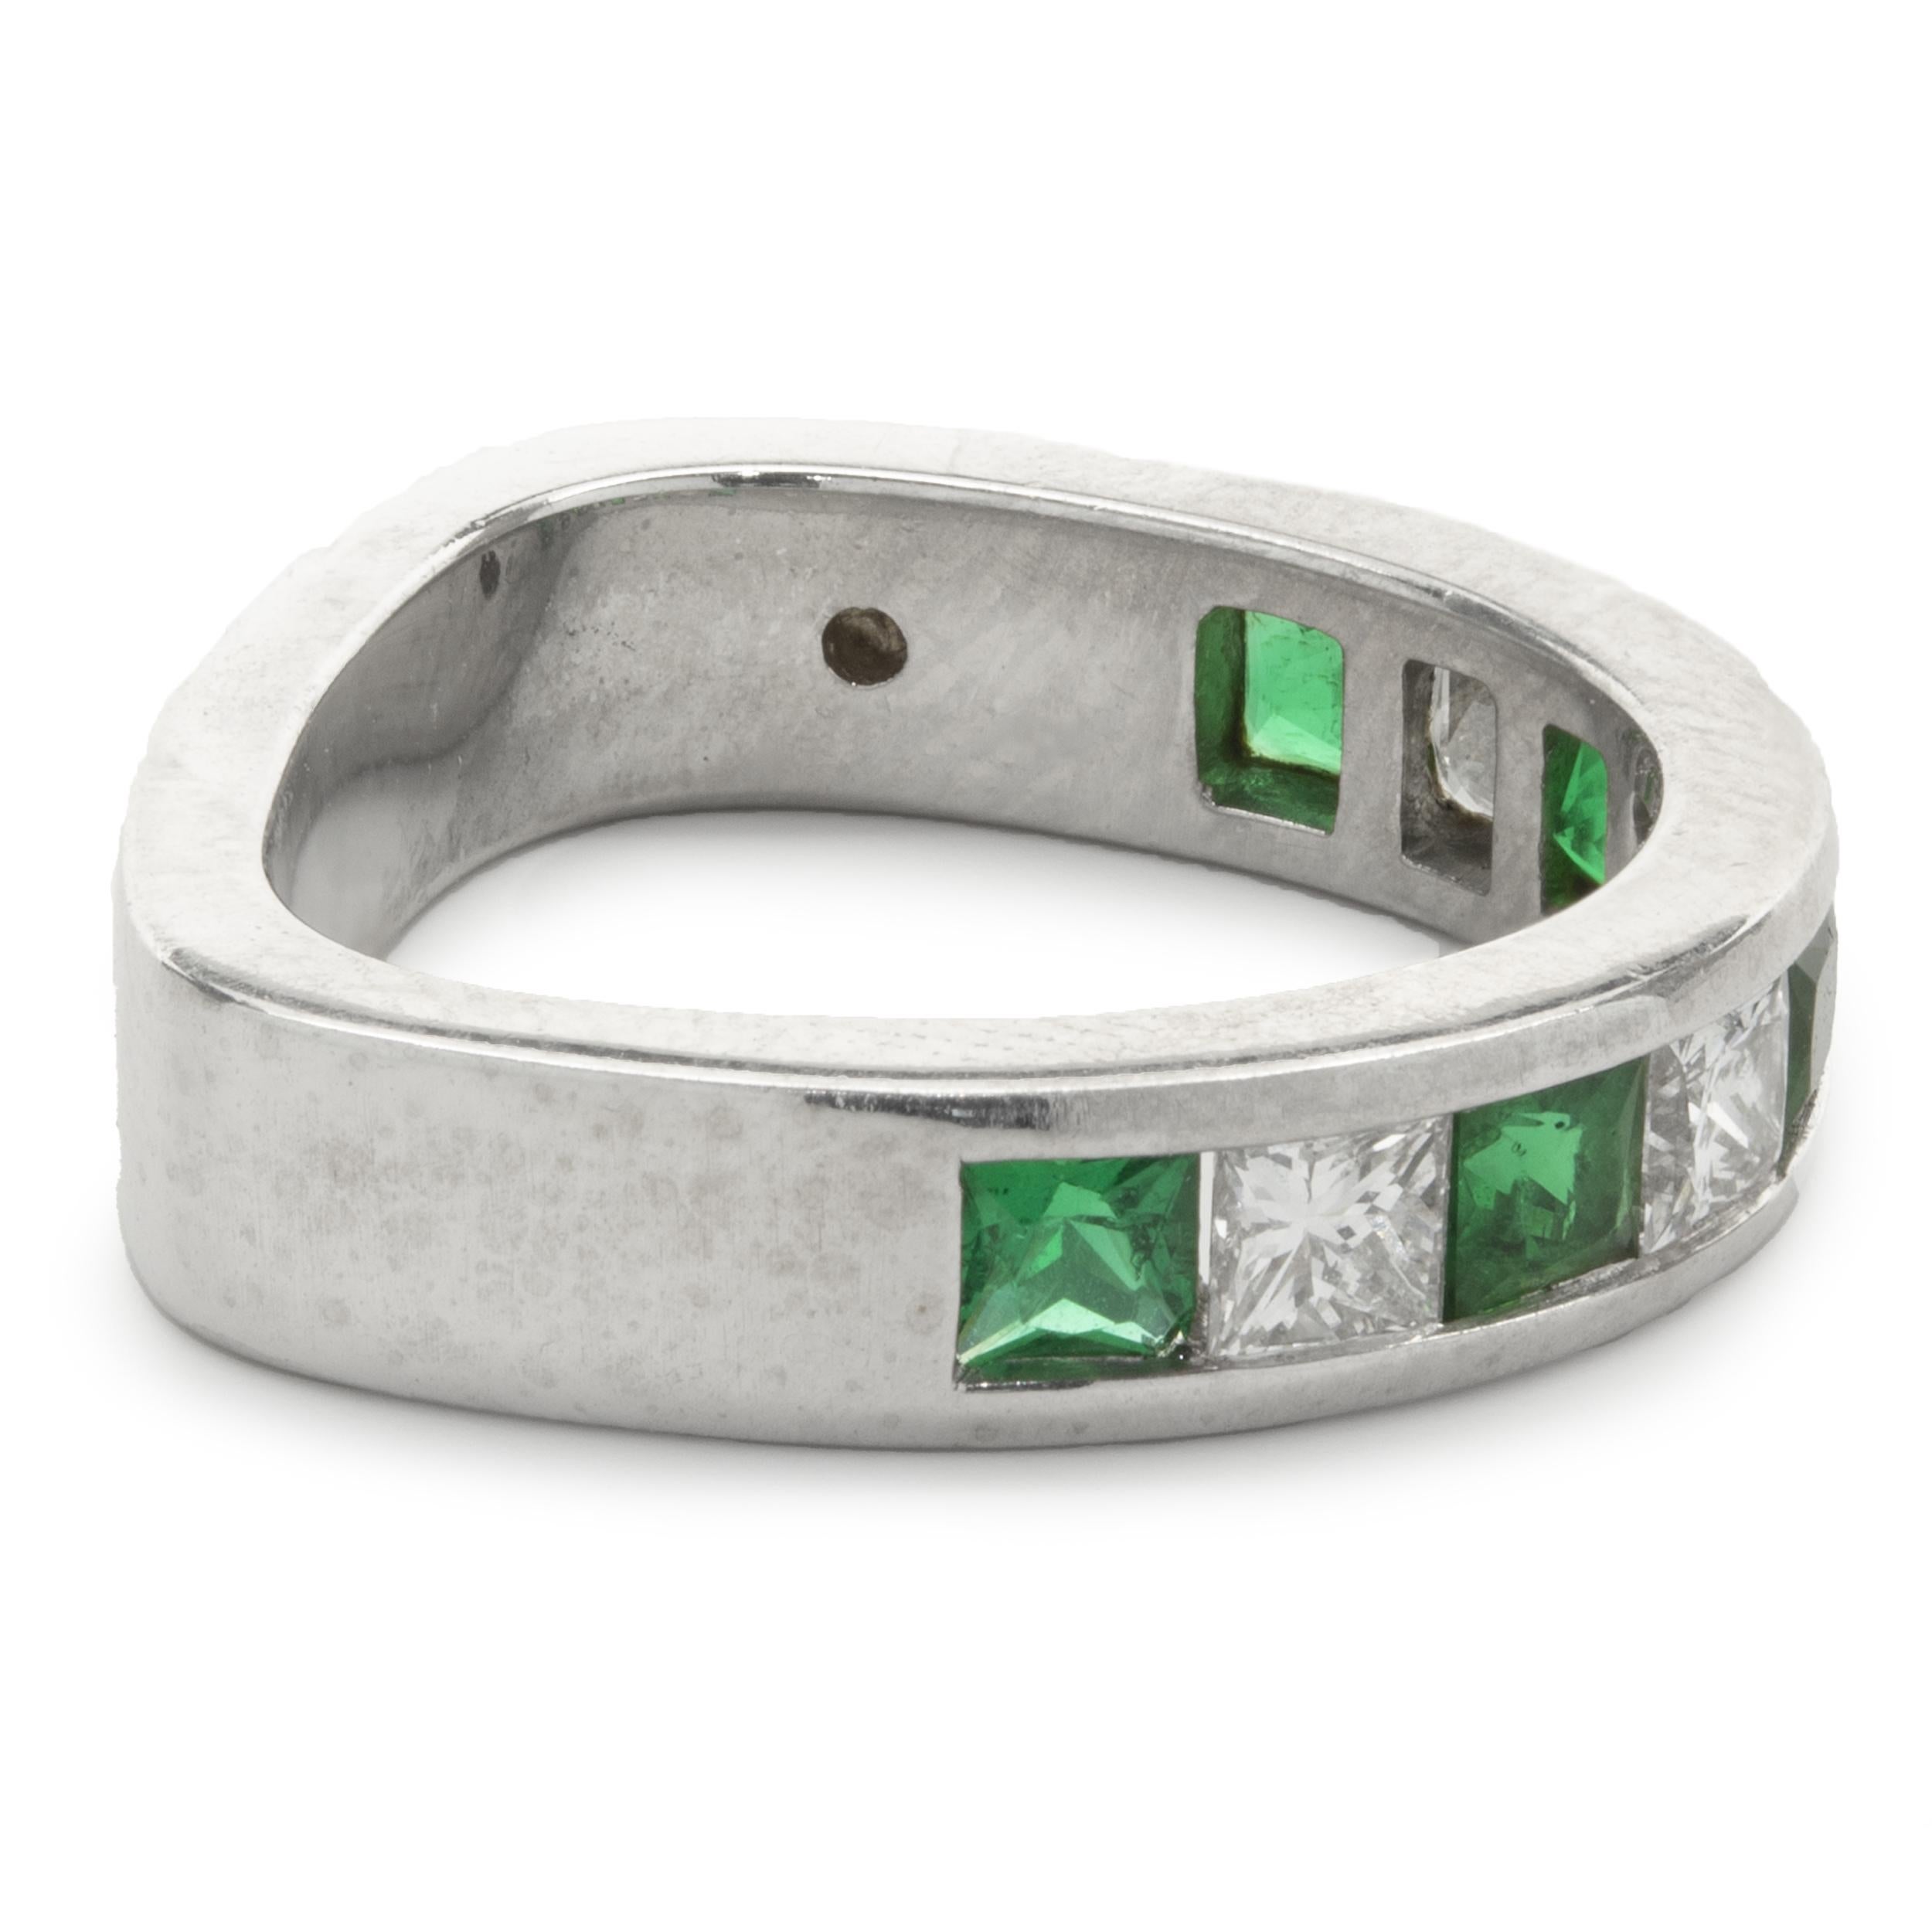 Designer: custom
Material: platinum
Emerald: 5 princess cut
Diamond: 4 princess cut = 0.61cttw
Color: D/F
Clarity: VS1-2
Dimensions: ring top measures 4.63mm wide
Ring Size: 4.75 (complimentary sizing available)
Weight: 9.52 grams